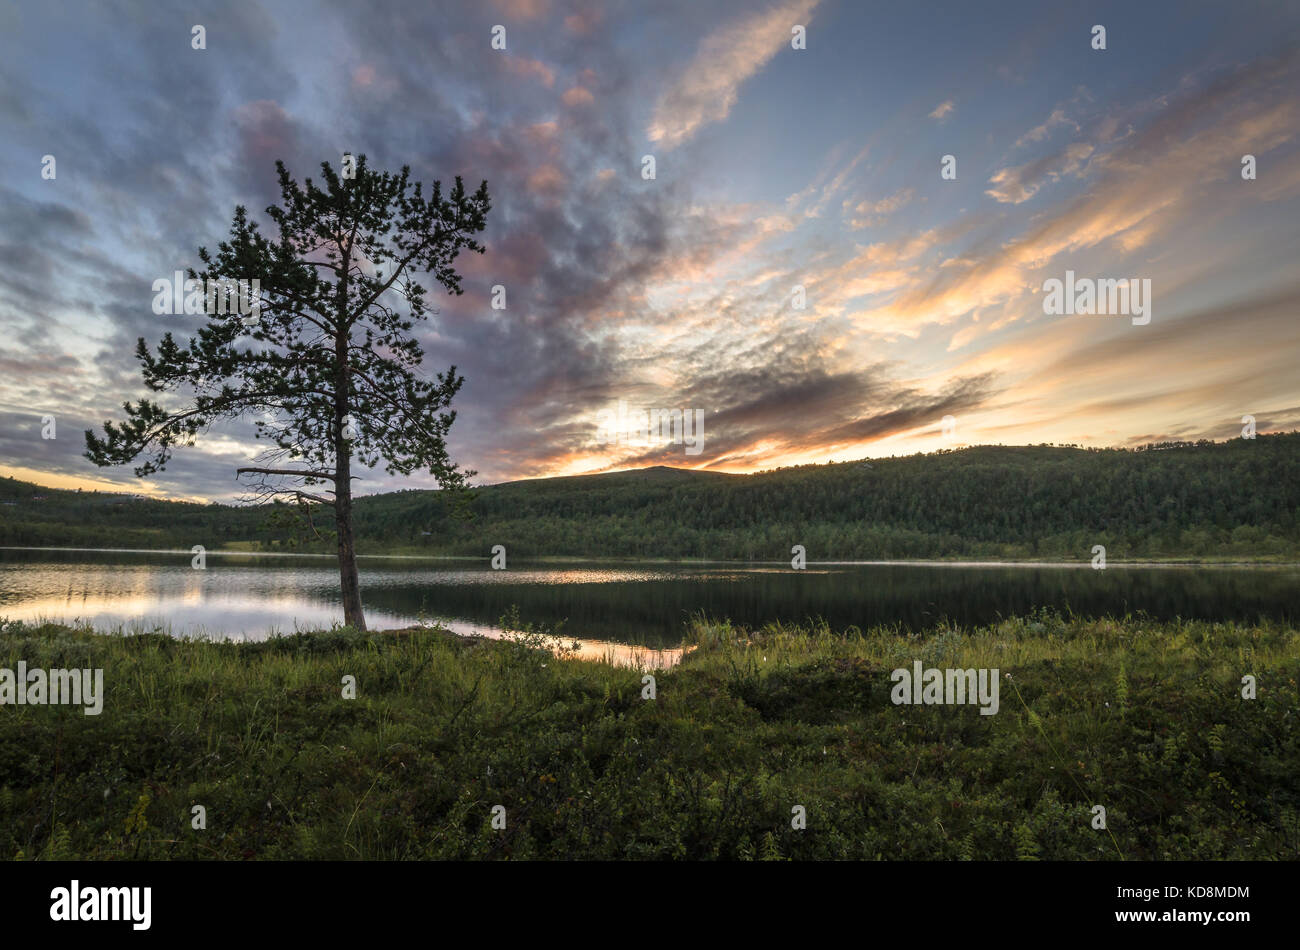 Small lake in forest with a single pinetree Stock Photo